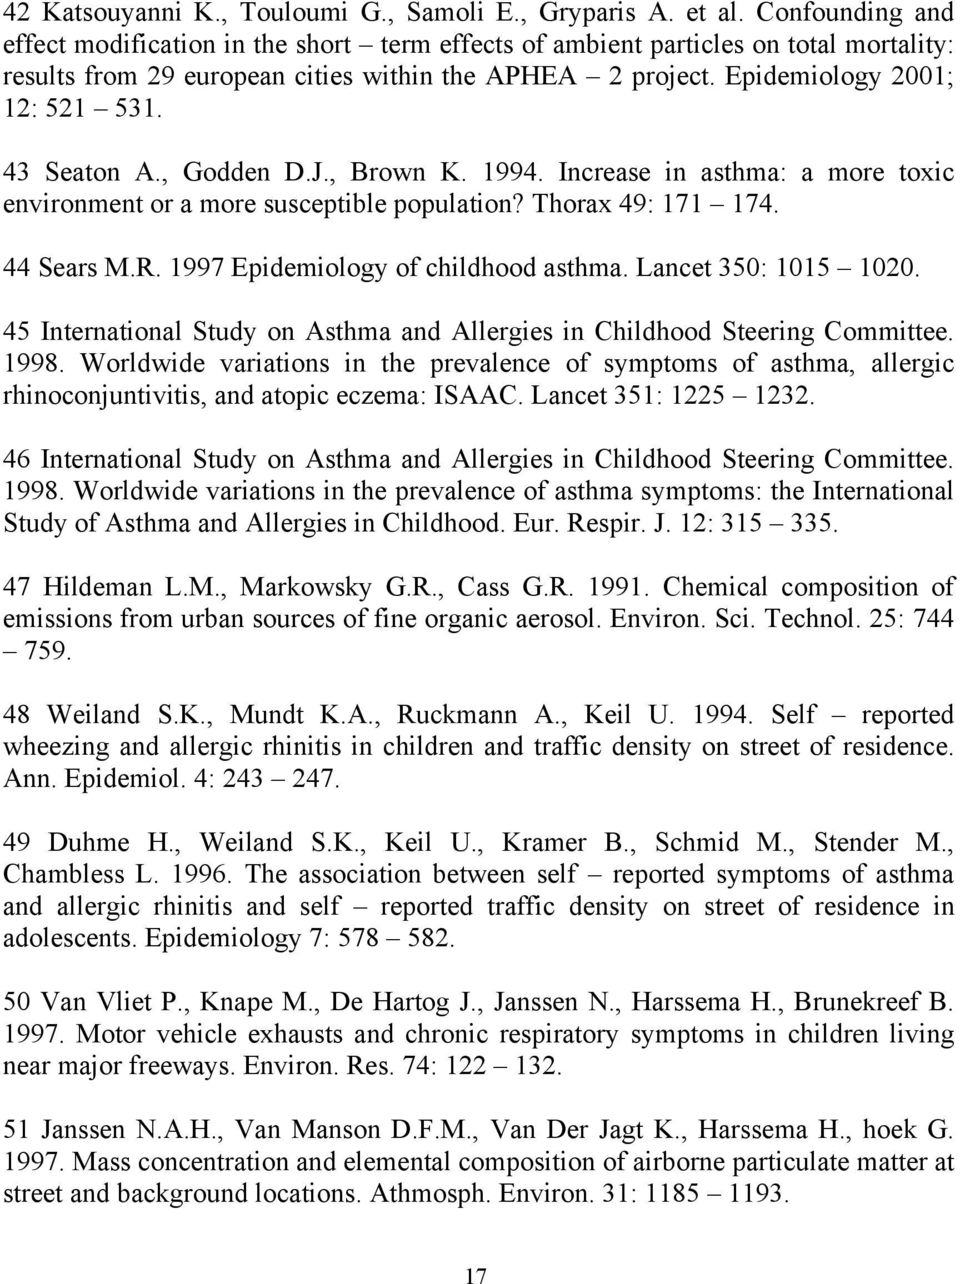 43 Seaton A., Godden D.J., Brown K. 1994. Increase in asthma: a more toxic environment or a more susceptible population? Thorax 49: 171 174. 44 Sears M.R. 1997 Epidemiology of childhood asthma.